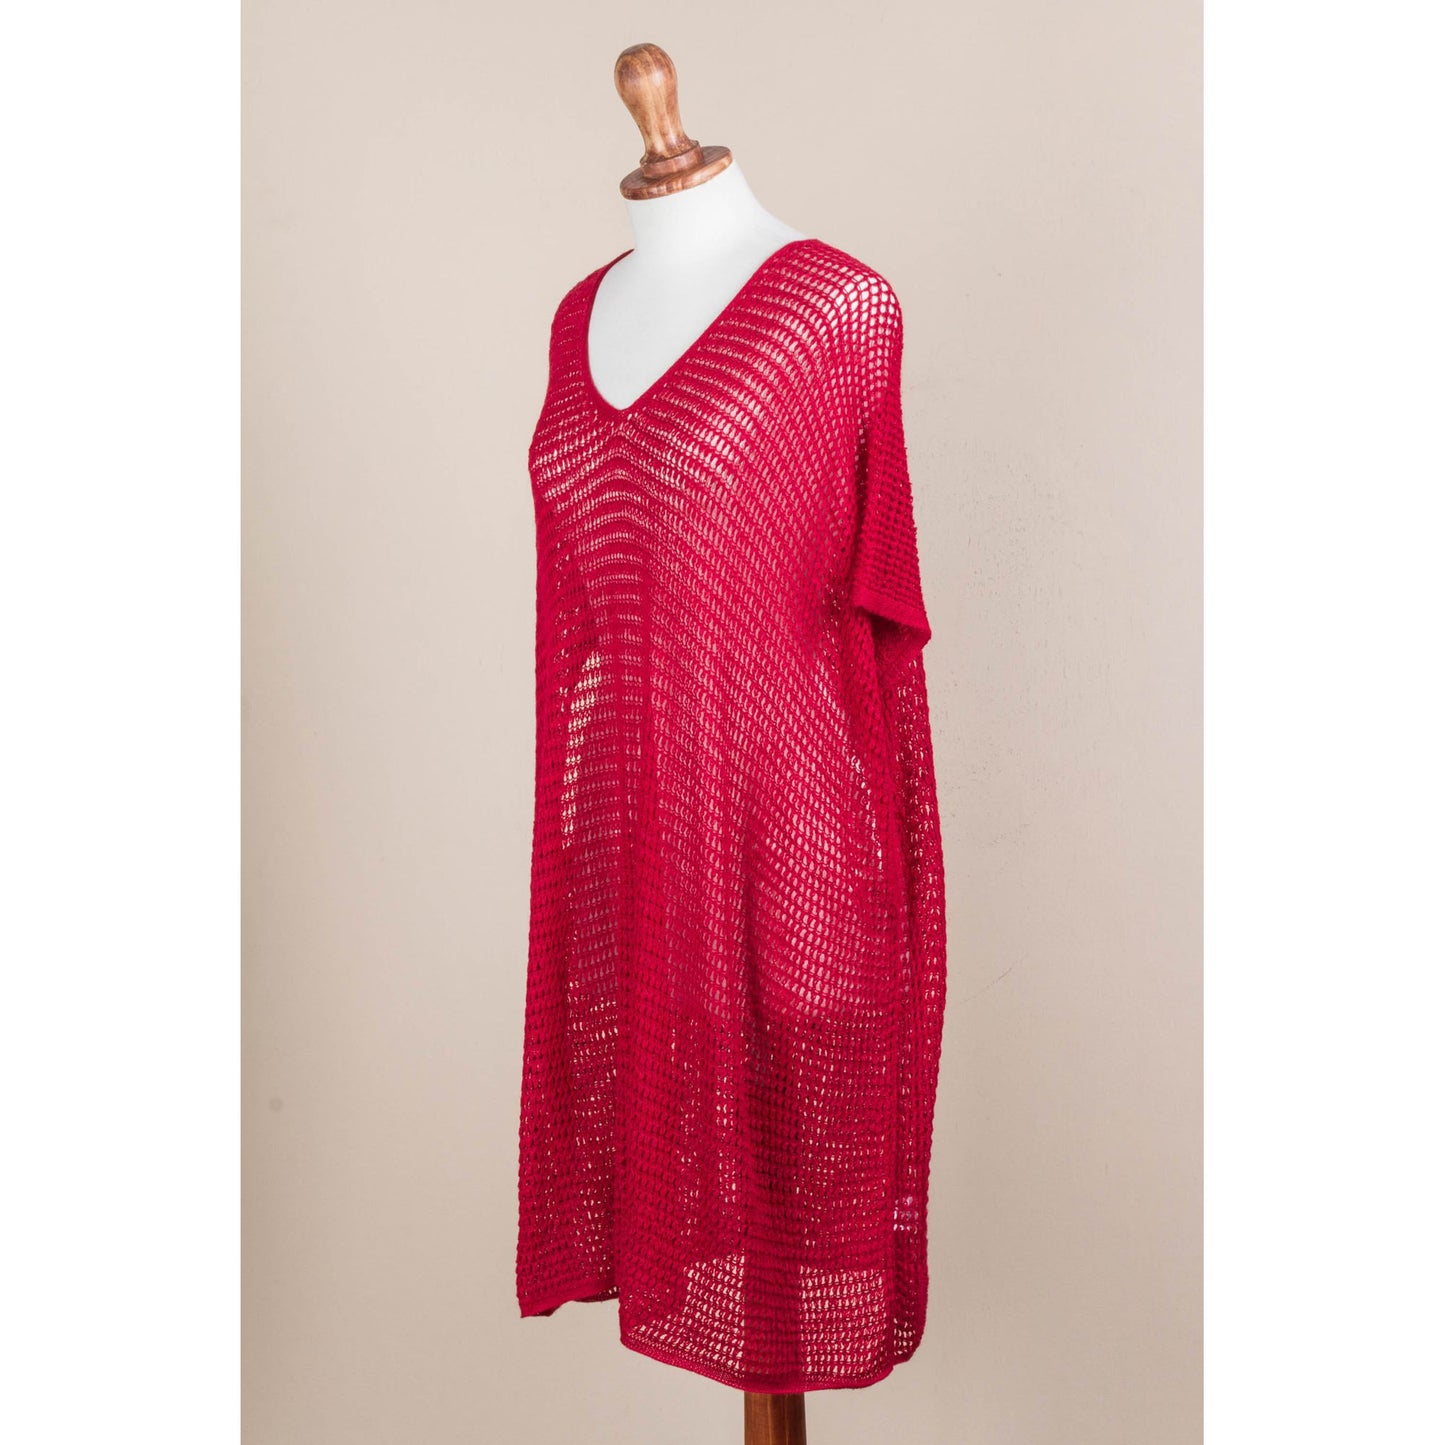 Red Dreamcatcher Knit Tunic